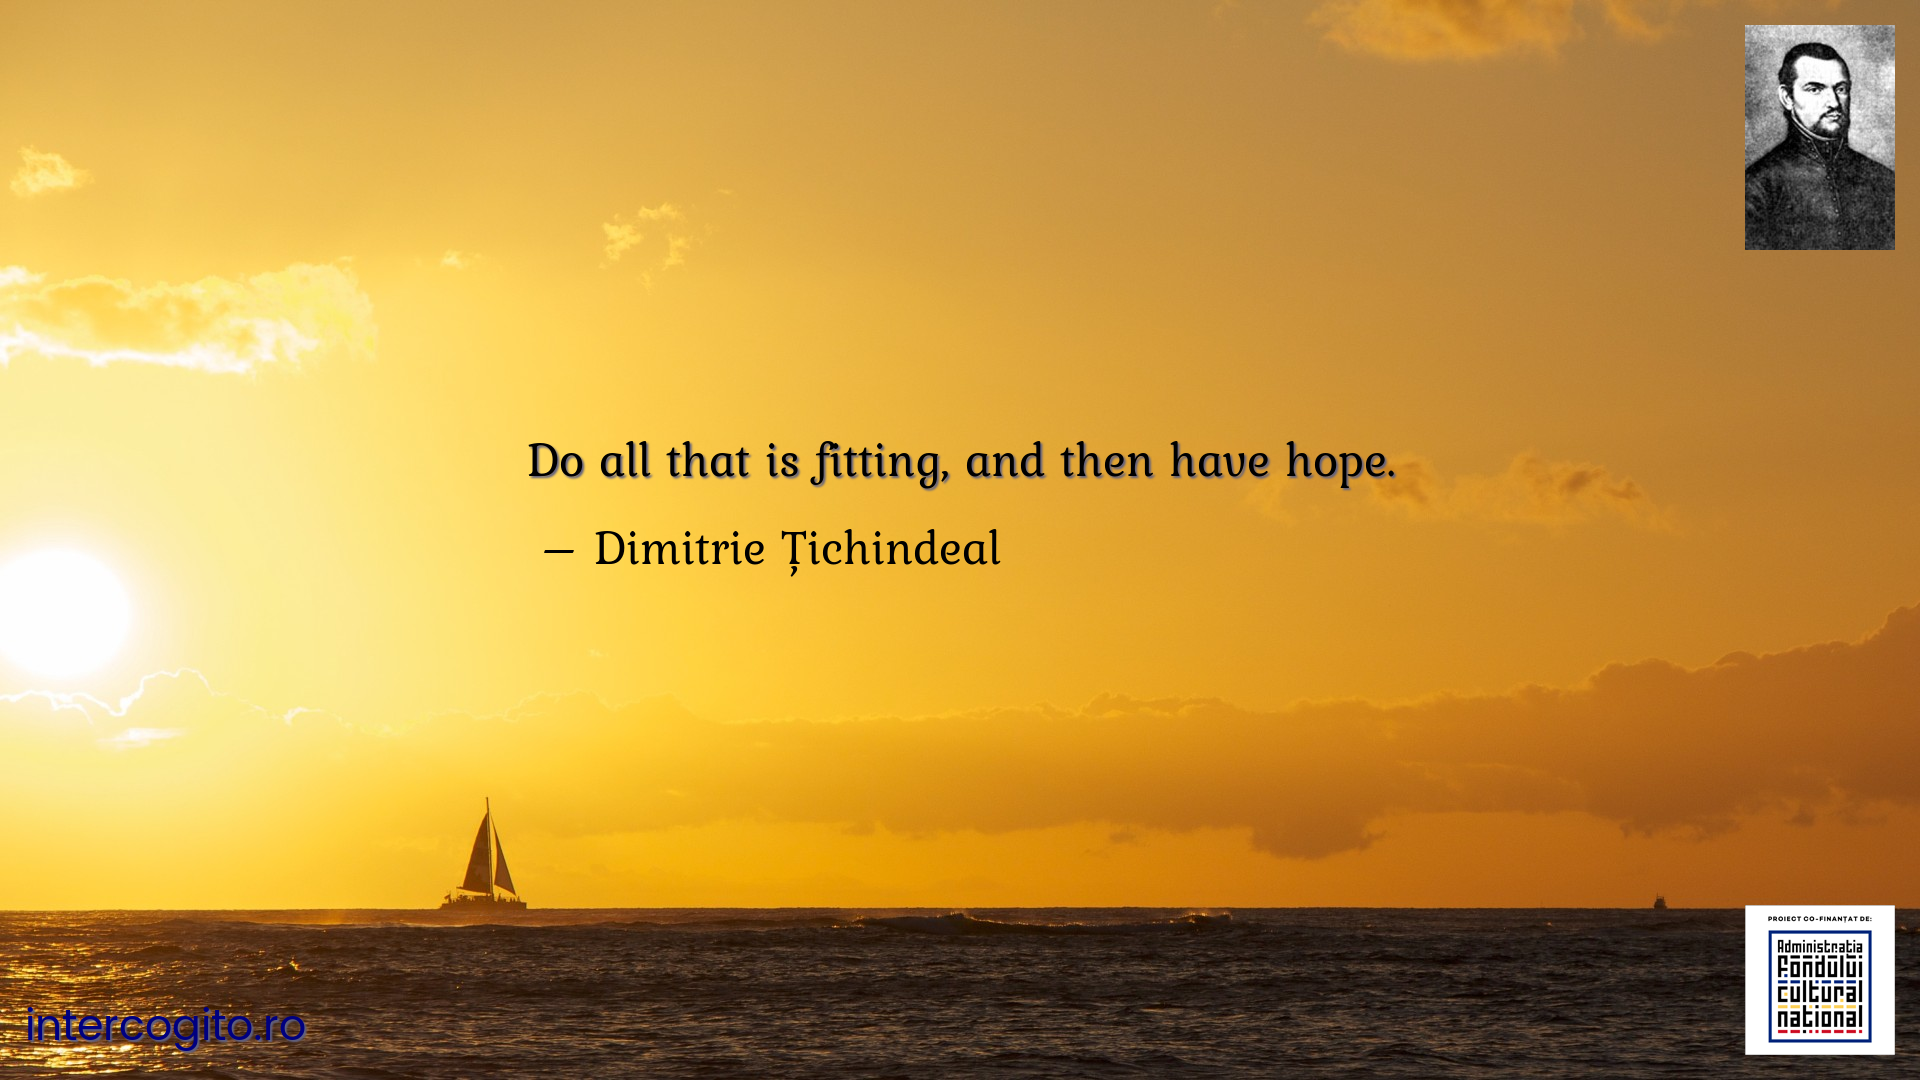 Do all that is fitting, and then have hope.